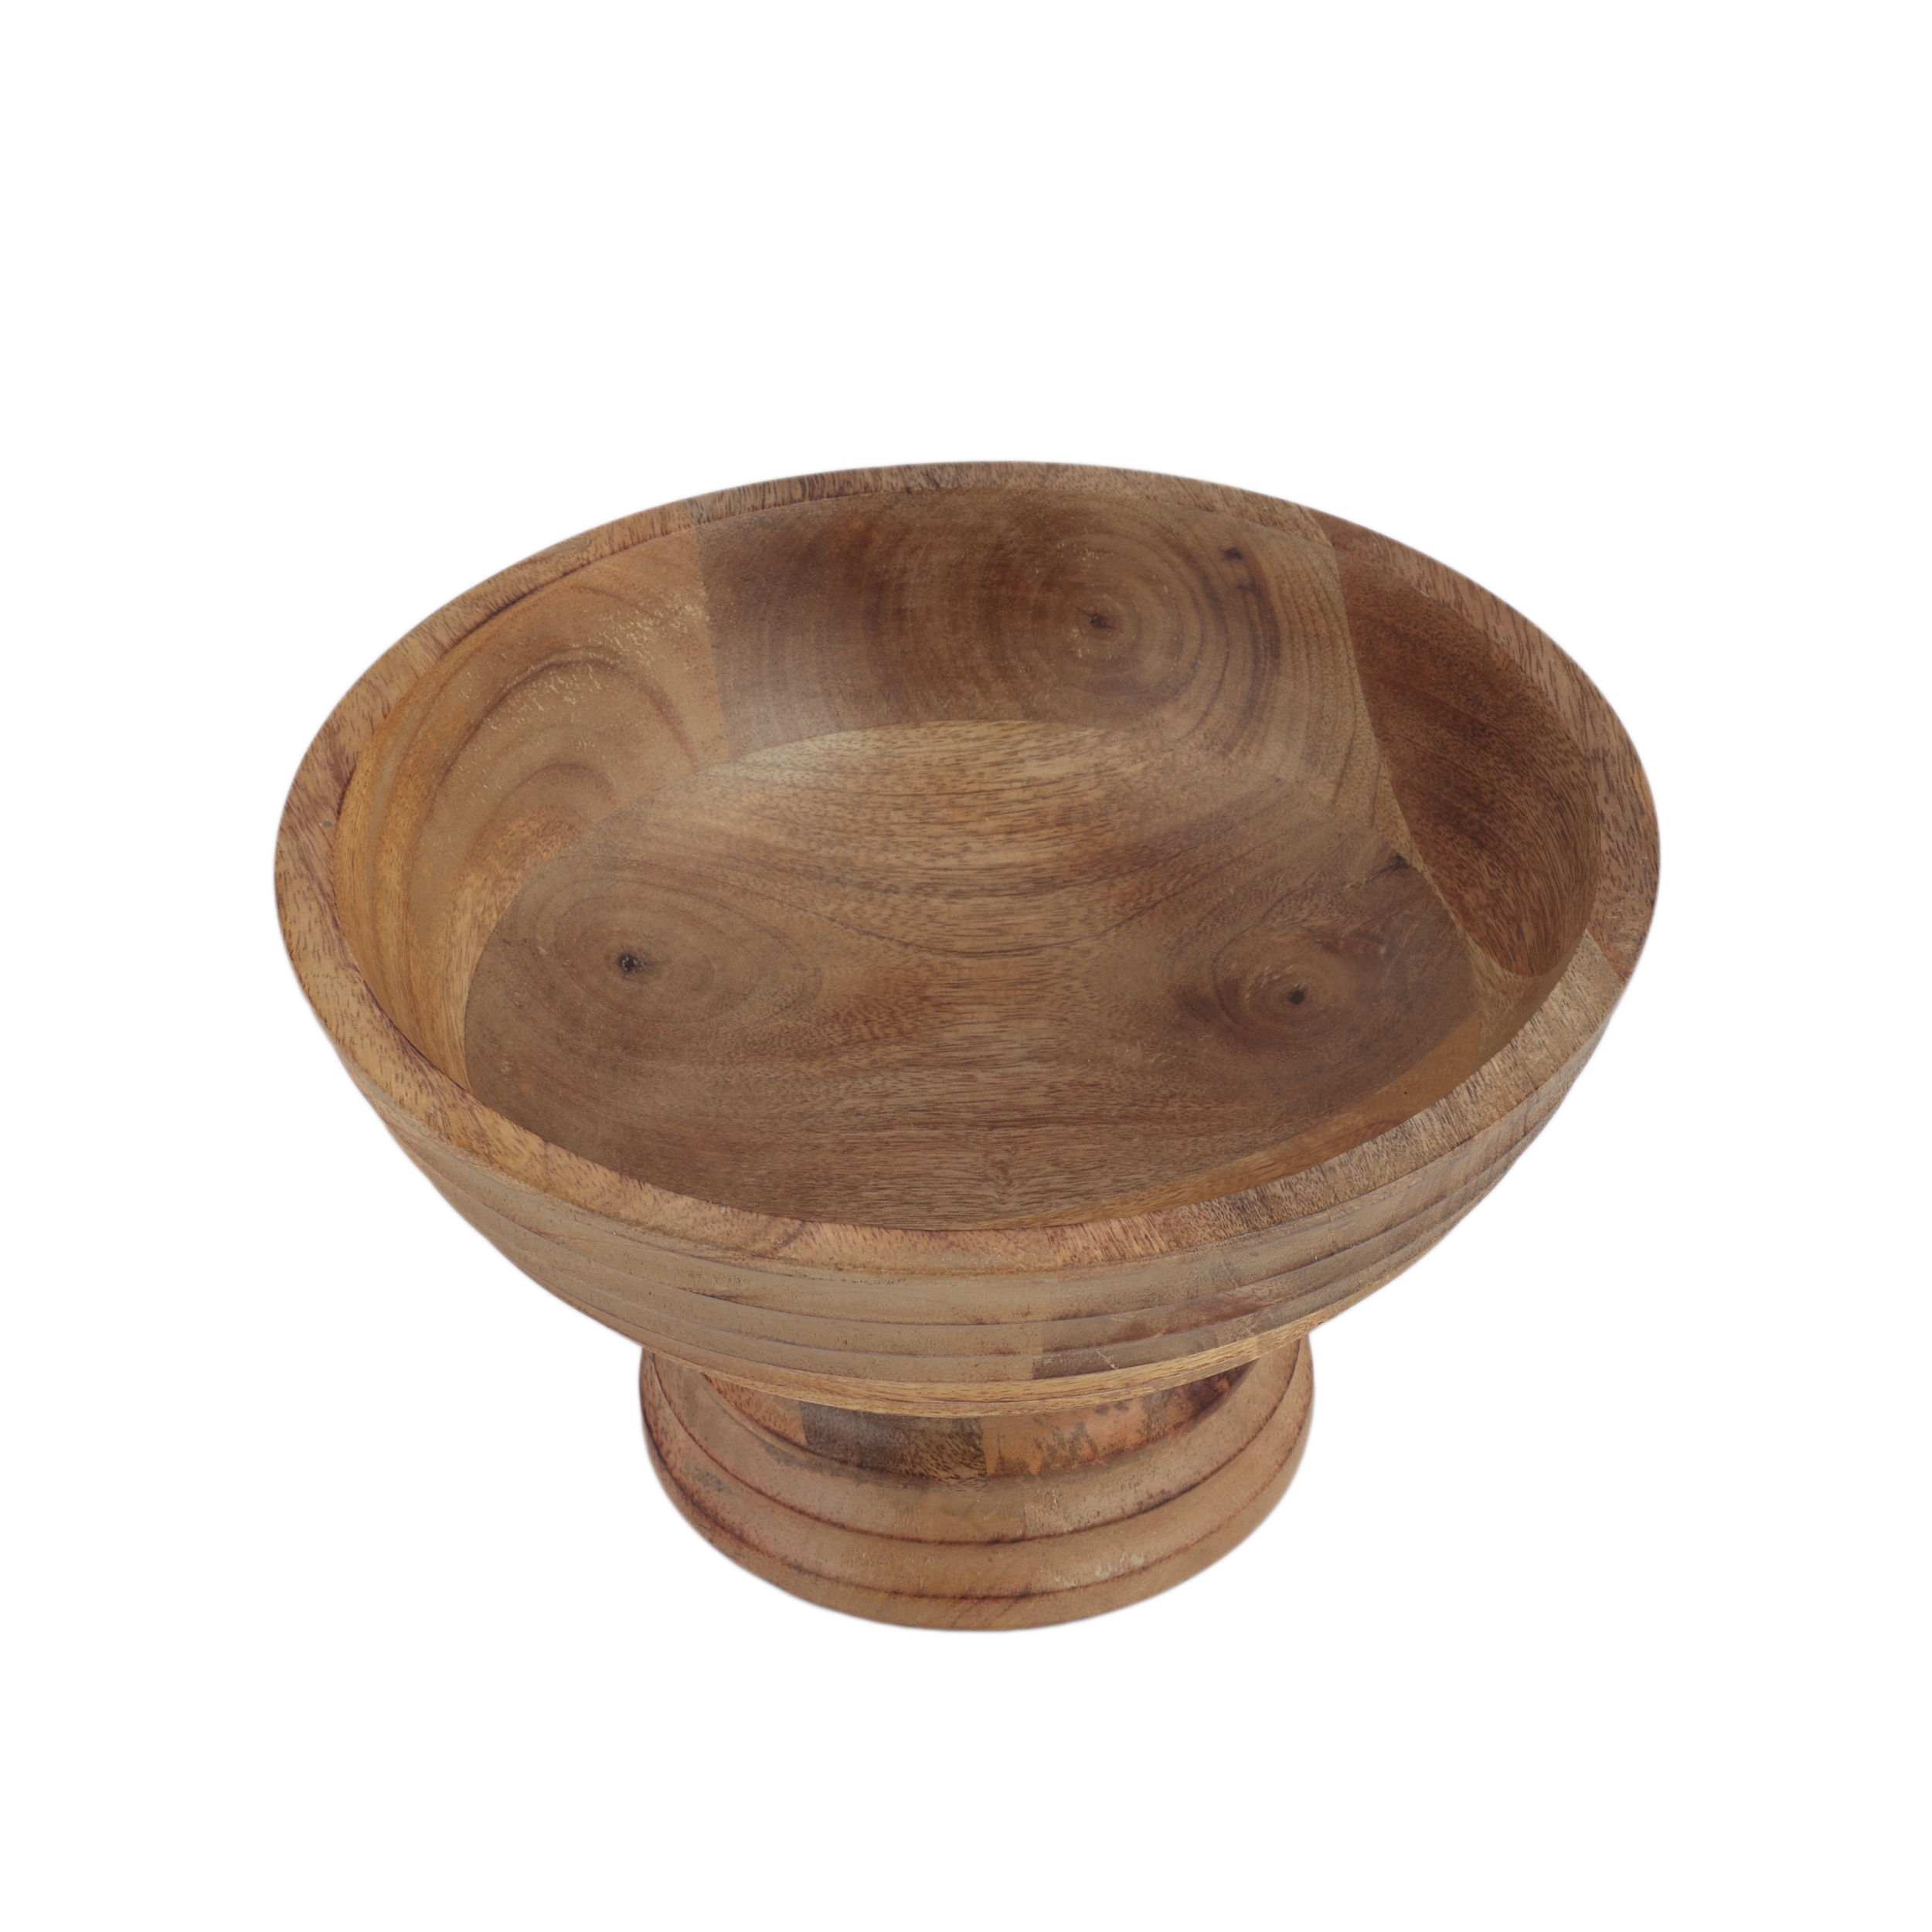 Coaster brass Bowl with hardwood for wine bottle - Nautic-Gifts